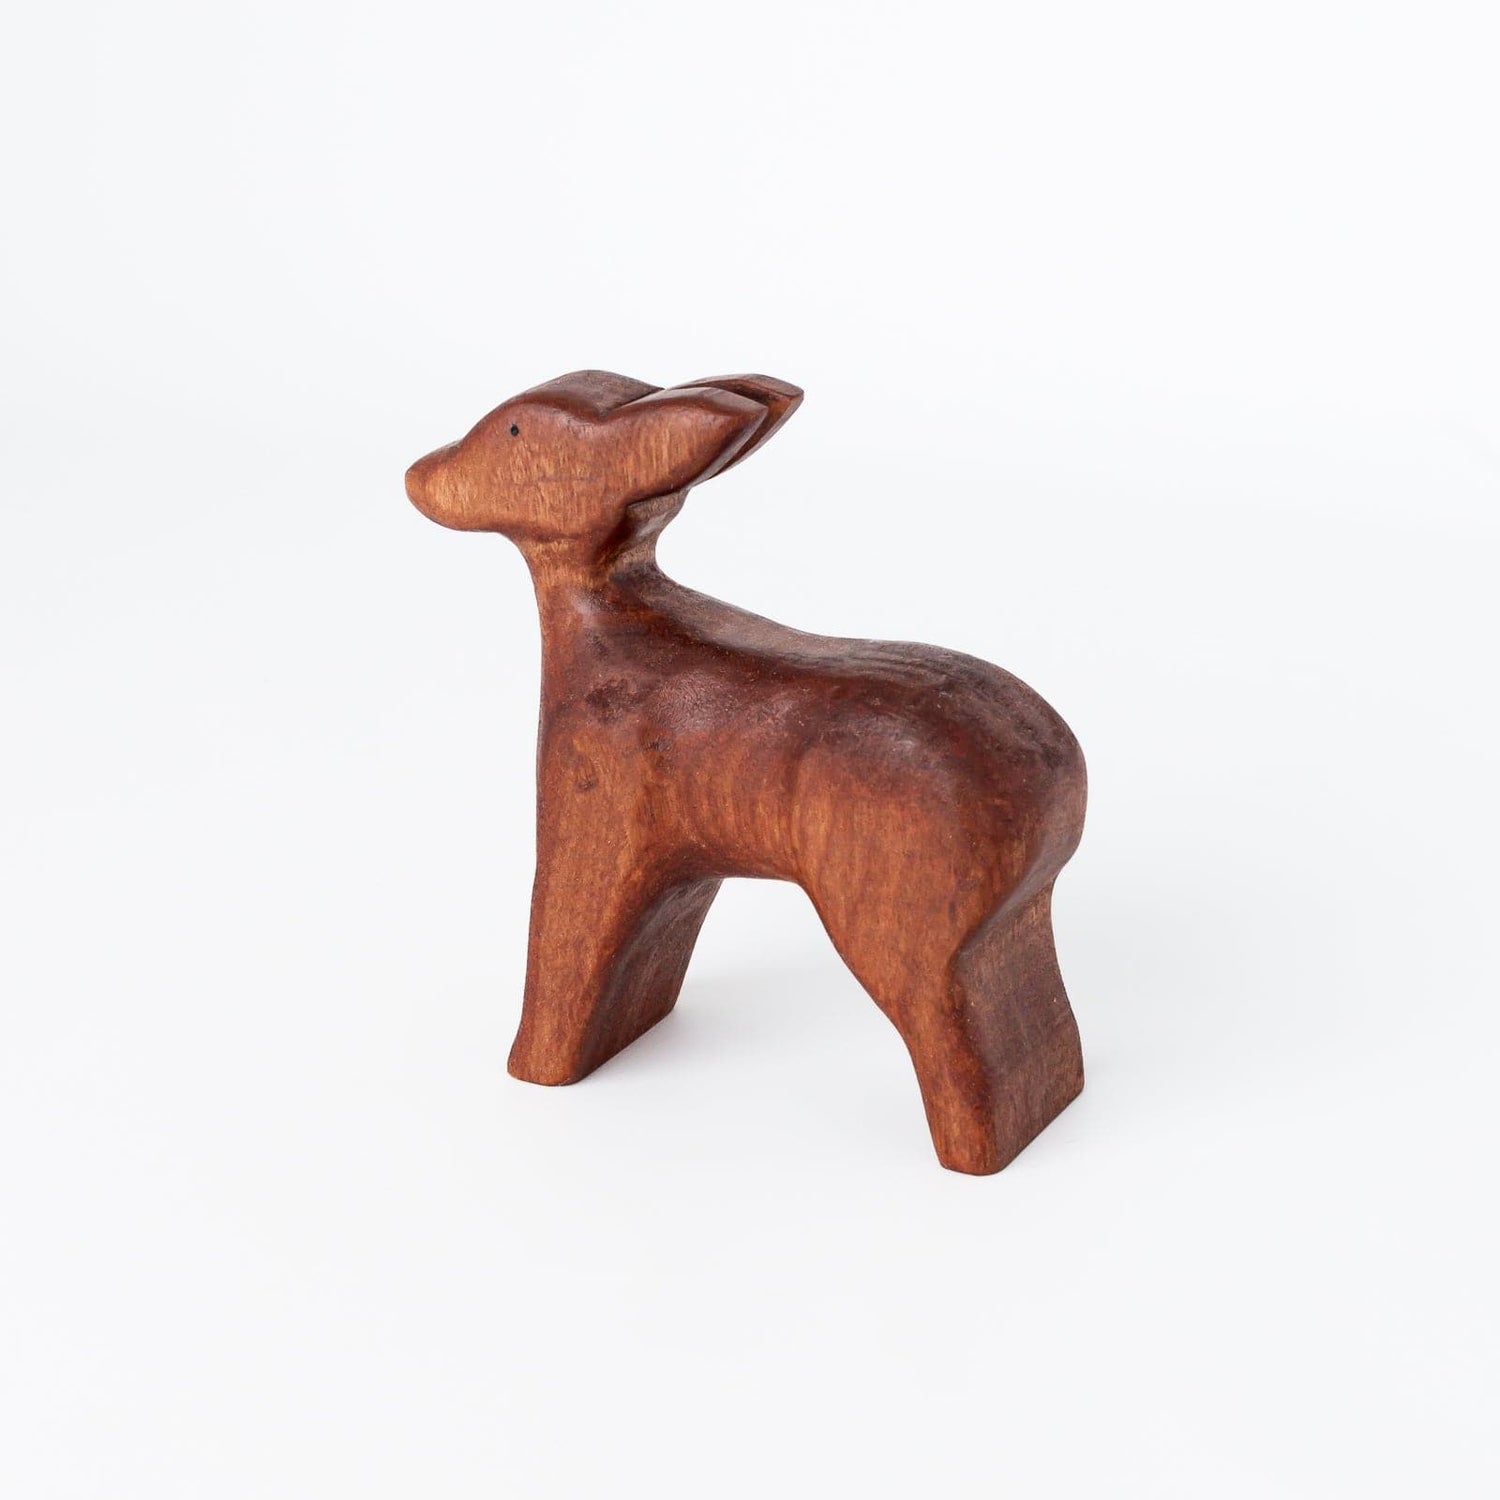 Delilah Doe Wooden Animal Toy (Handmade in Canada) – The Playful Peacock